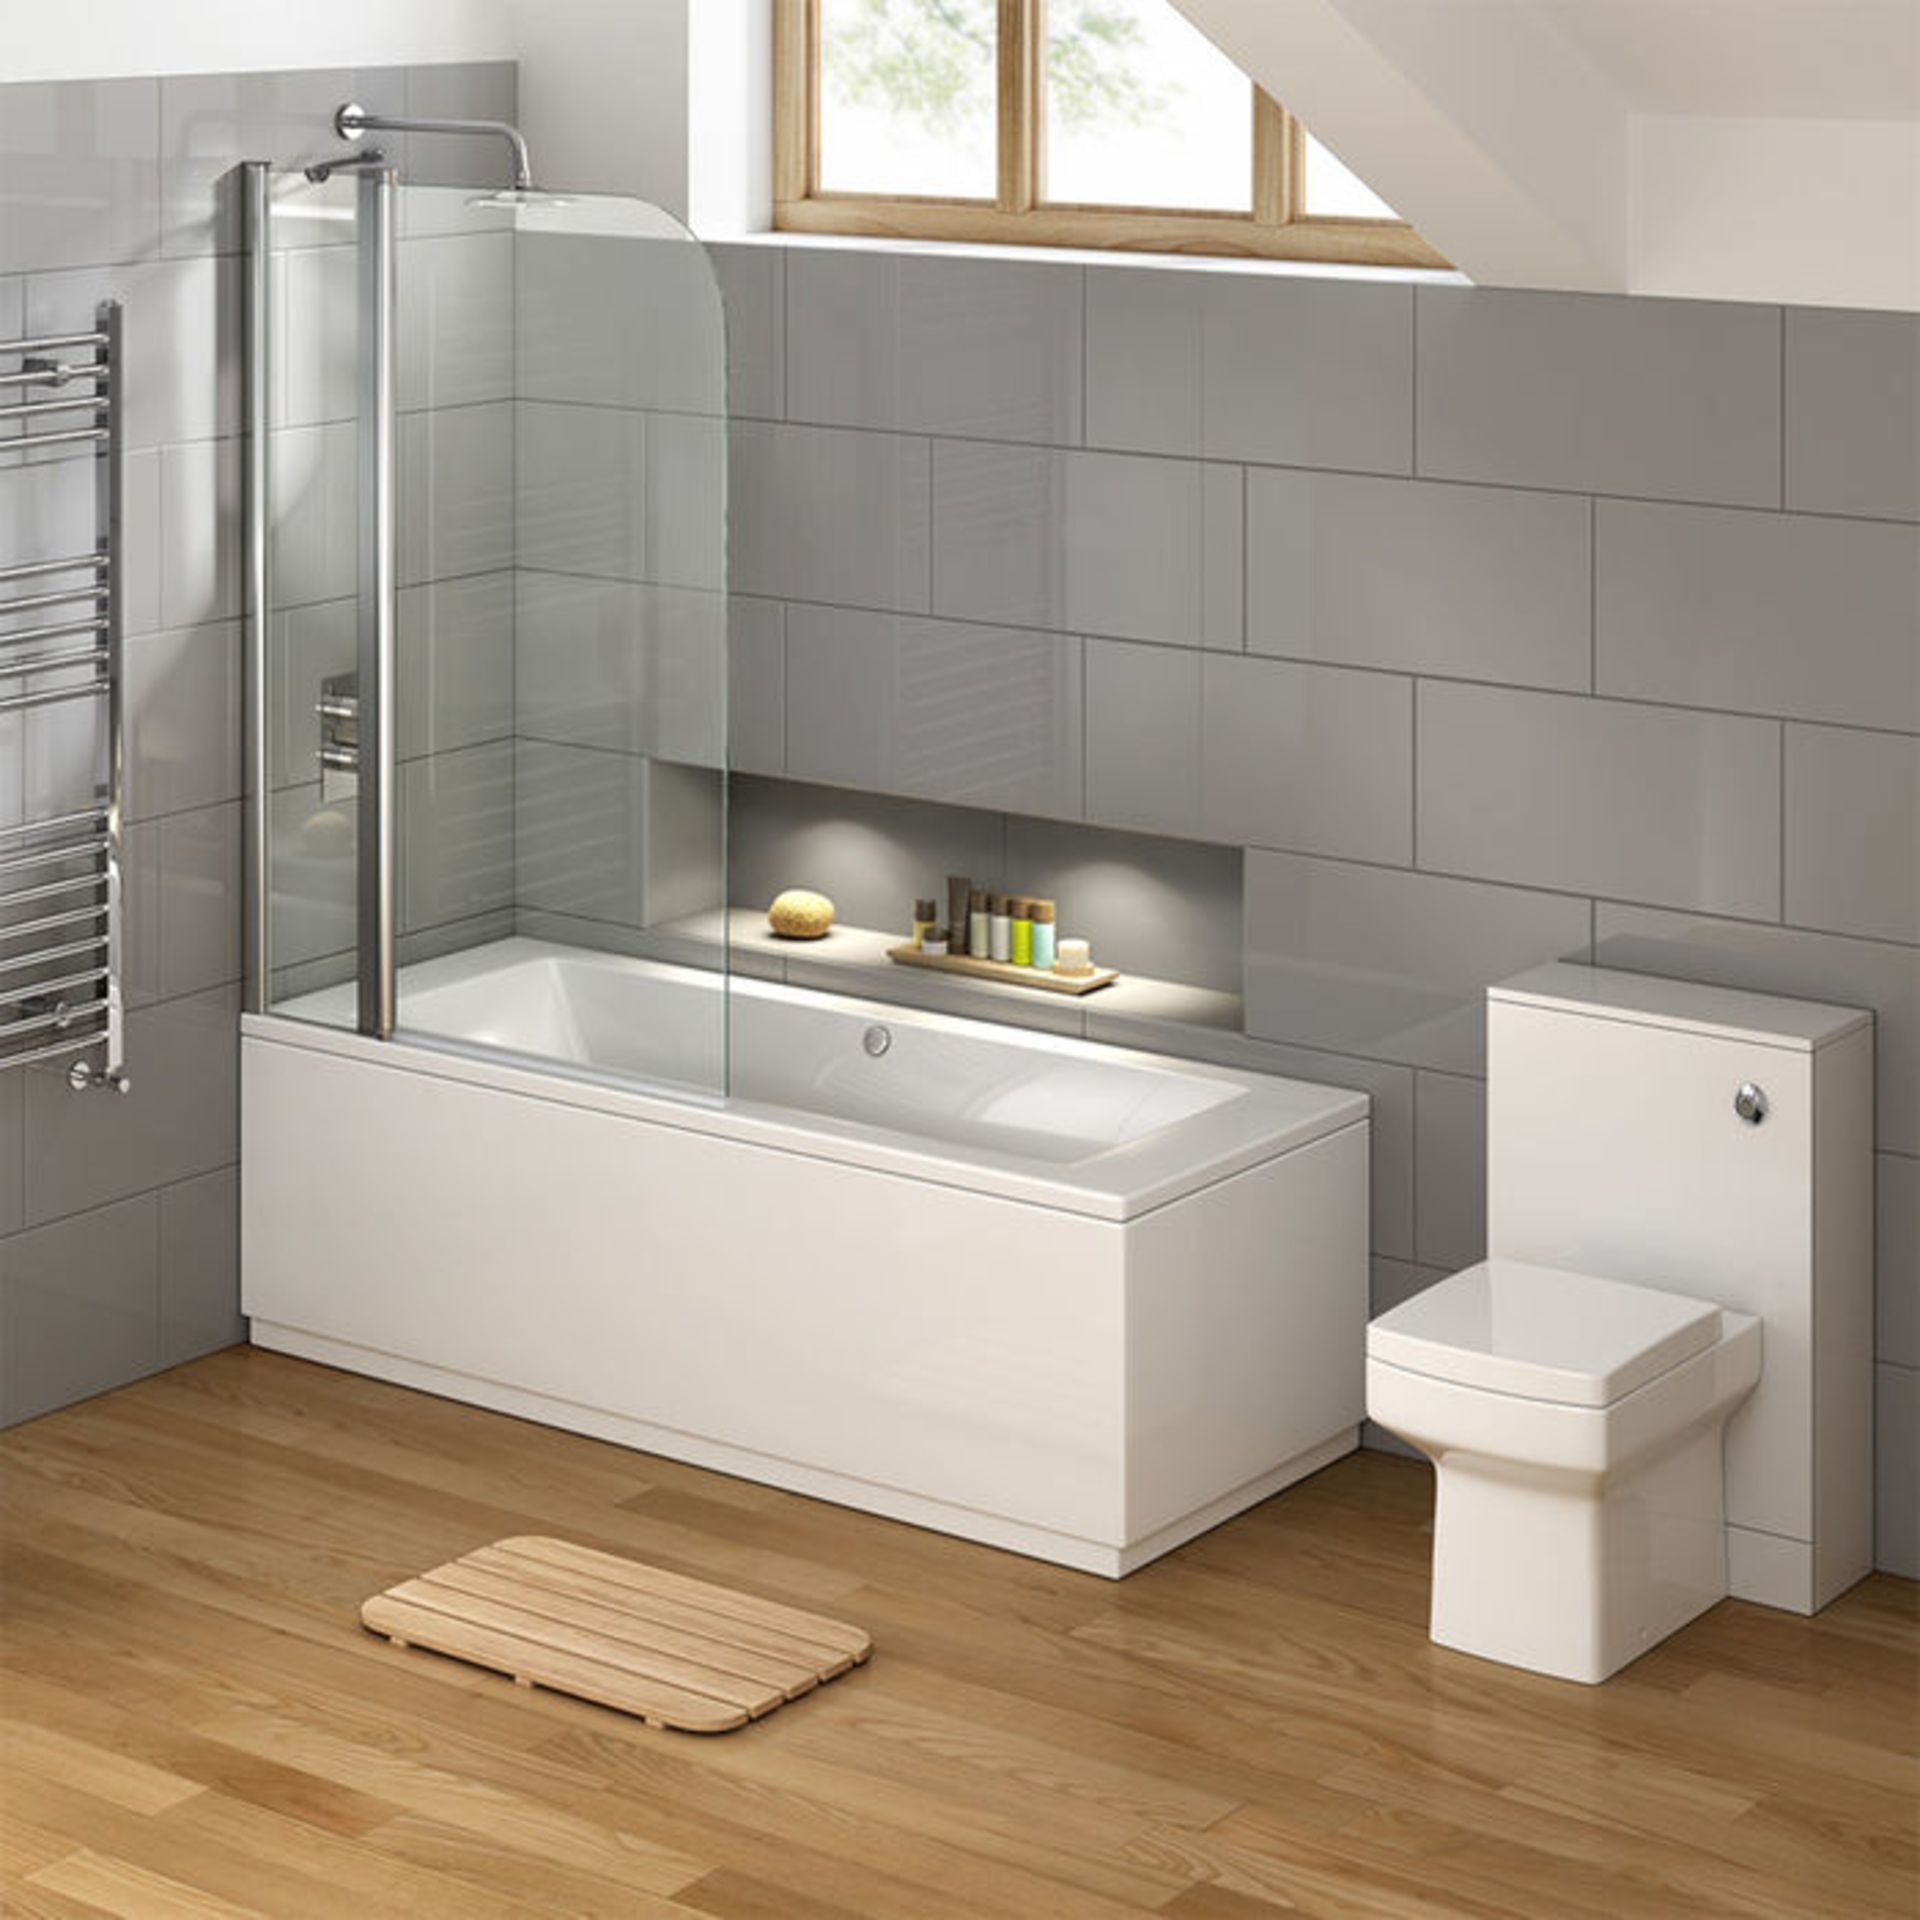 (DK44) 1000mm - 6mm - EasyClean Straight Bath Screen. RRP £224.99. 6mm Tempered Safety Glass - Image 3 of 4